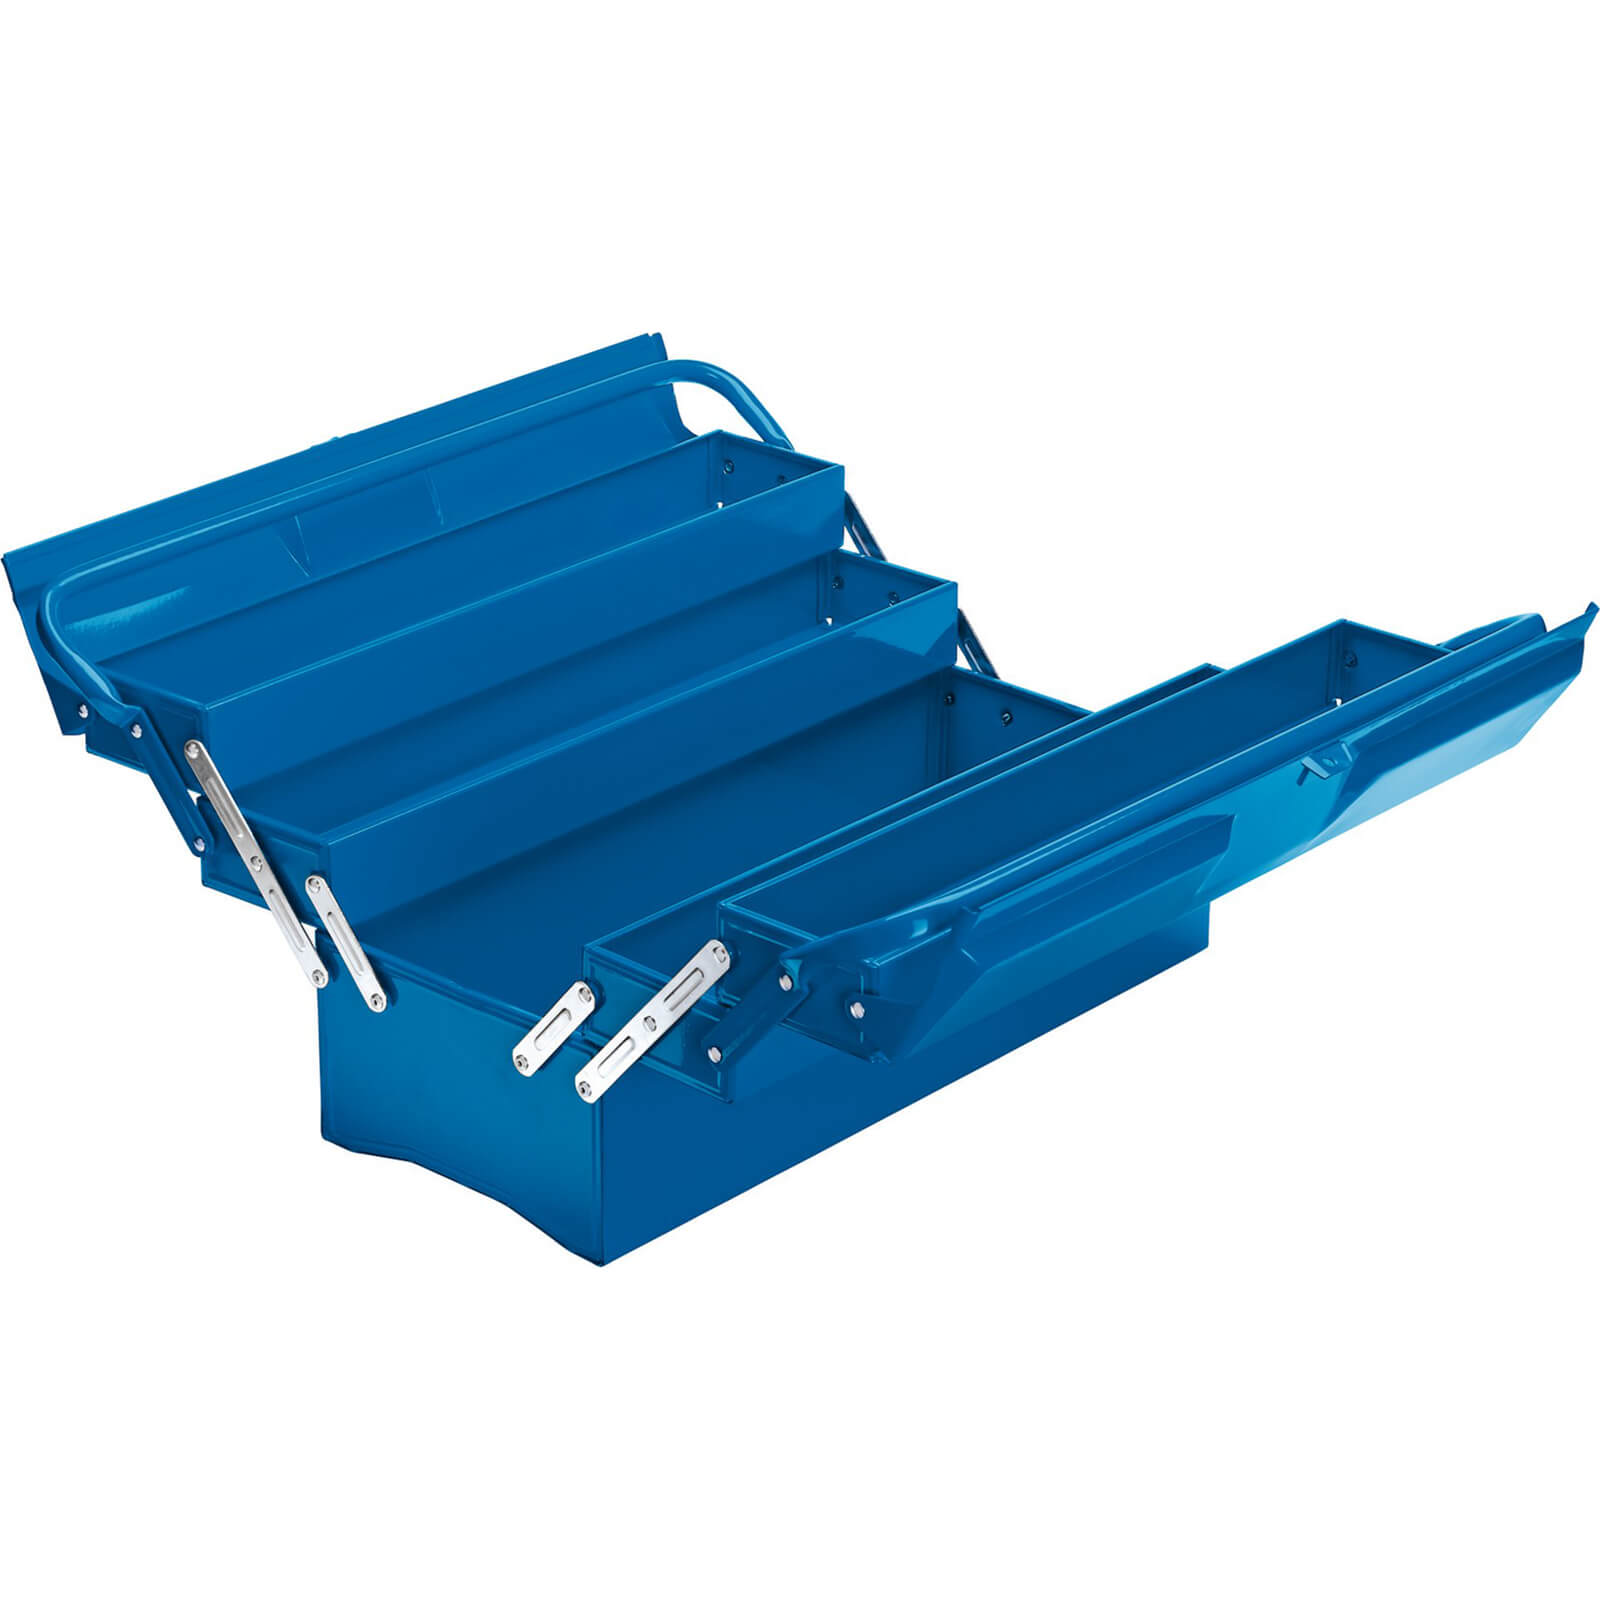 Image of Draper 5 Tray Metal Cantilever Tool Box 500mm